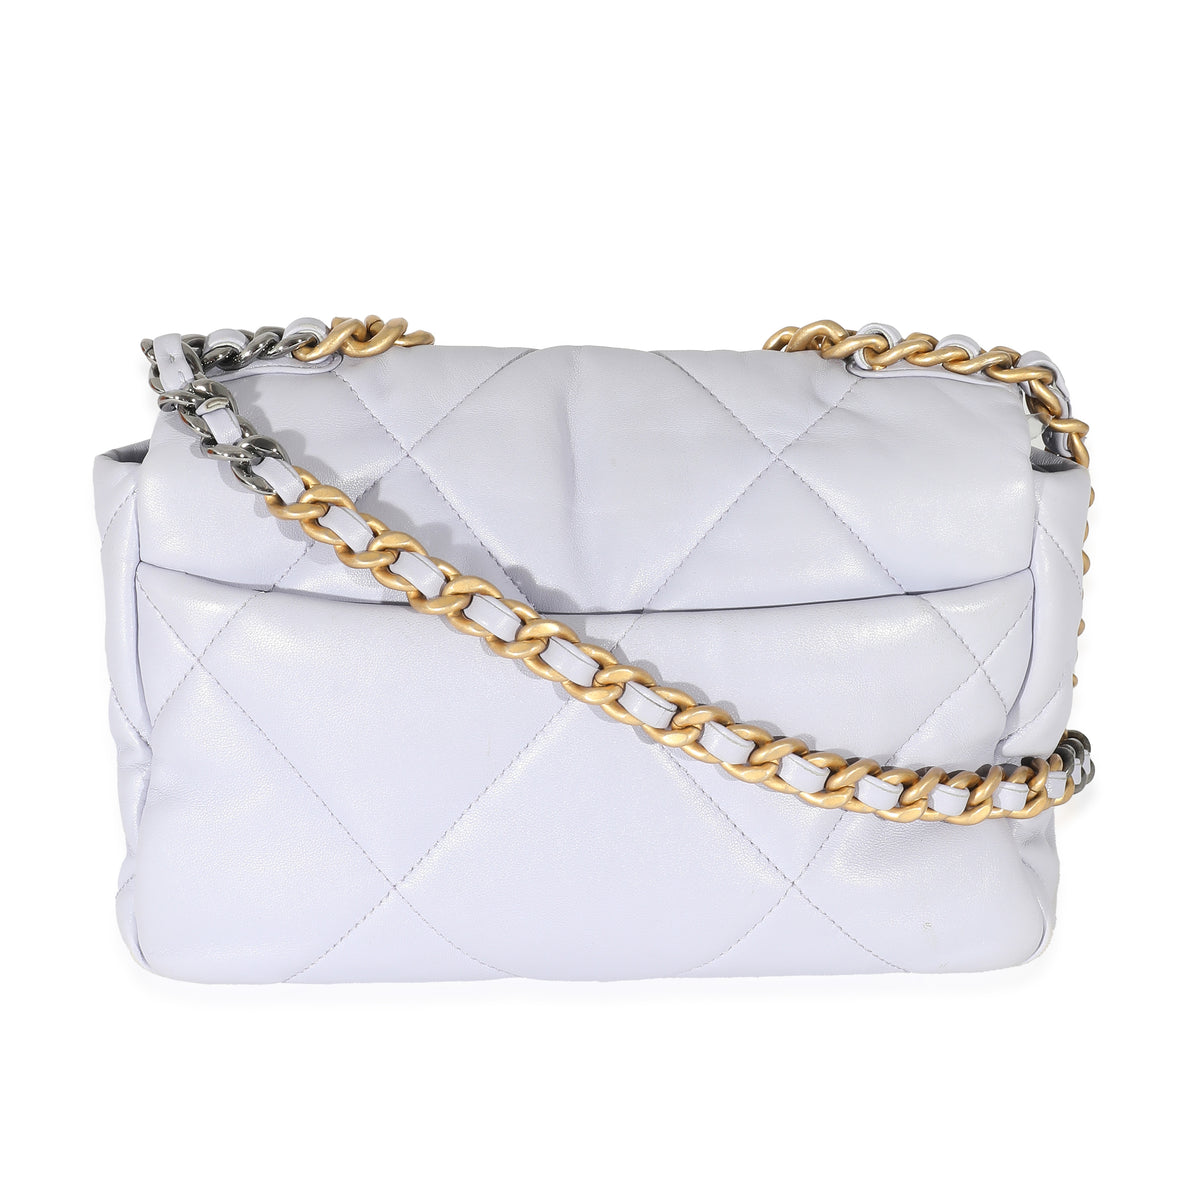 Chanel Metallic Silver Quilted Lambskin Chanel 19 Wallet On Chain, myGemma, IT